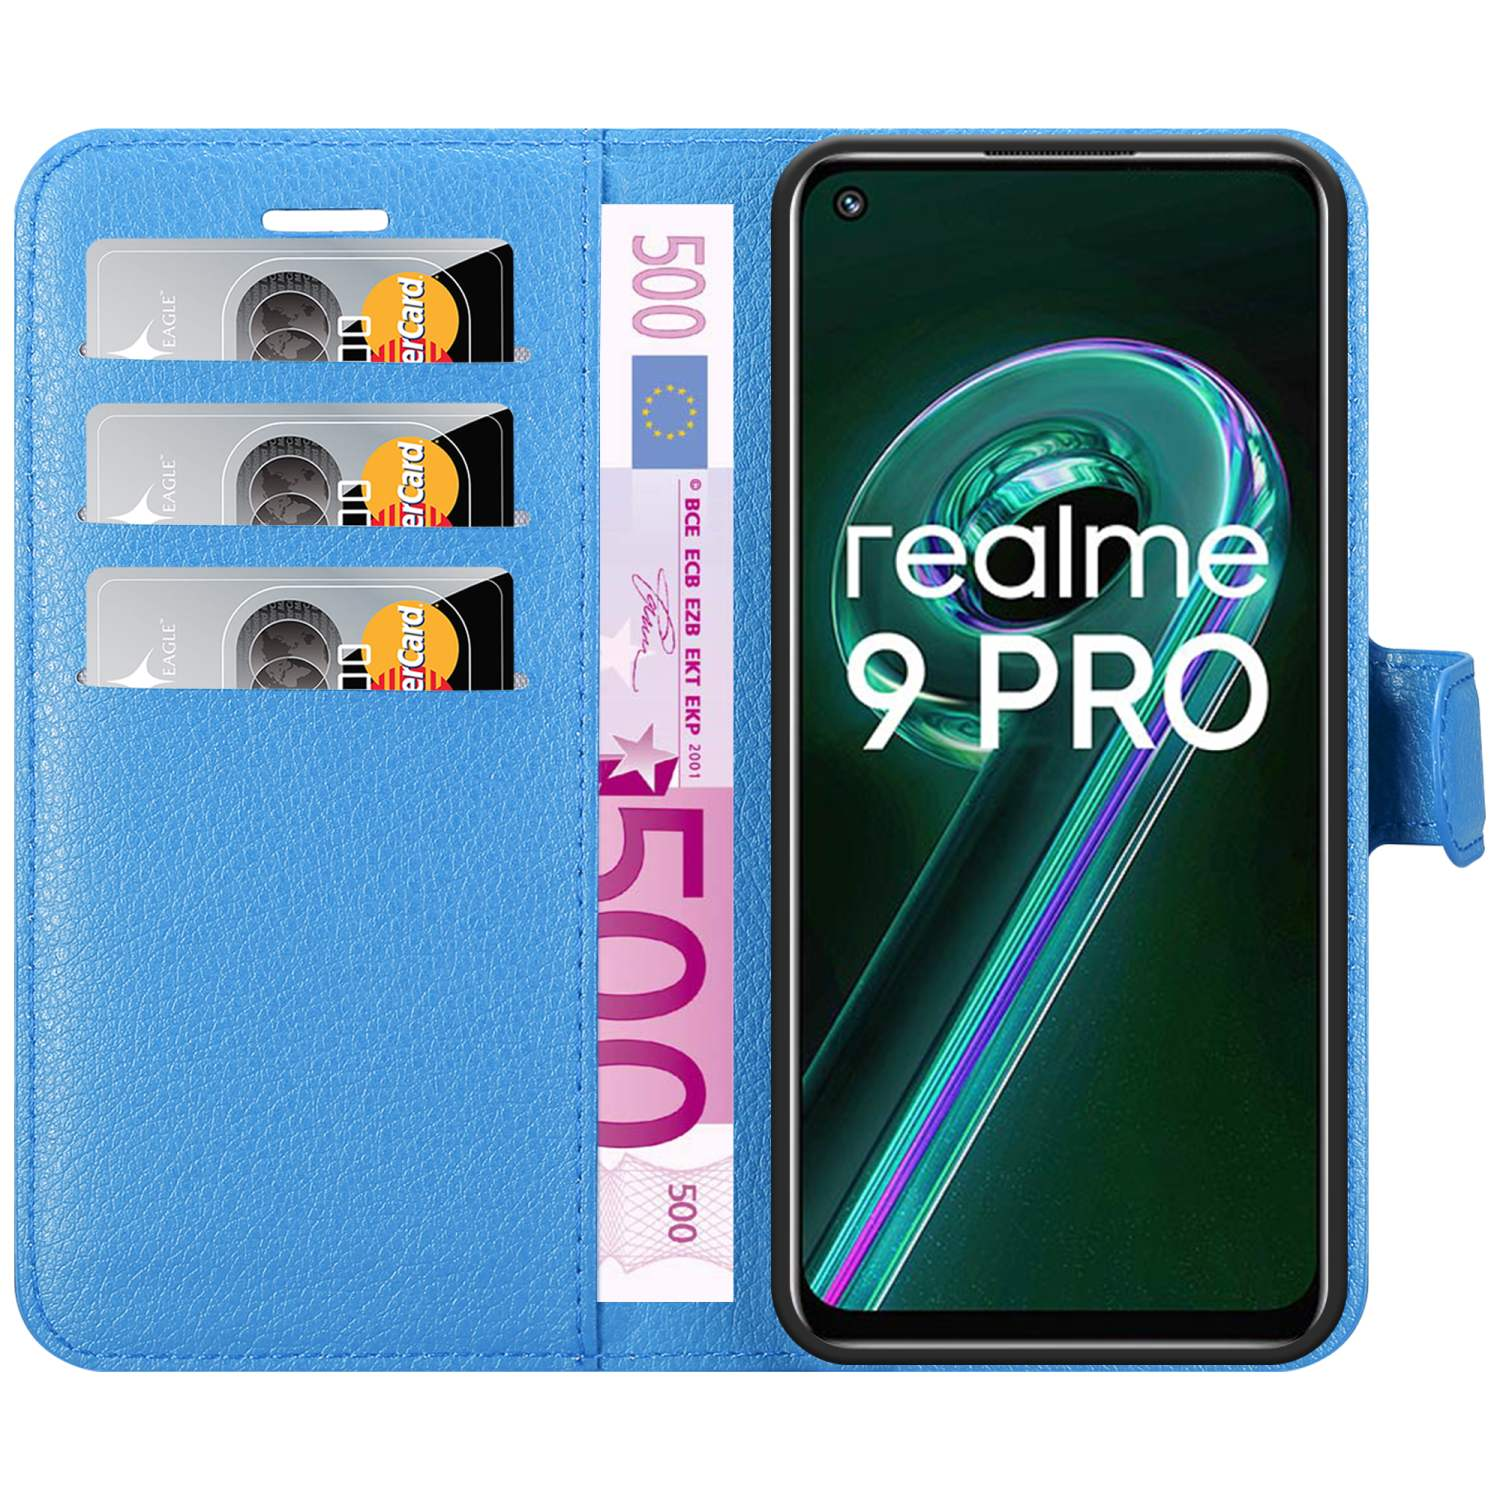 / Book Q5 9 / 2 Standfunktion, Bookcover, 5G, Hülle V25 / CADORABO 5G 9 OnePlus BLAU PRO Nord Realme, PASTELL LITE CE /